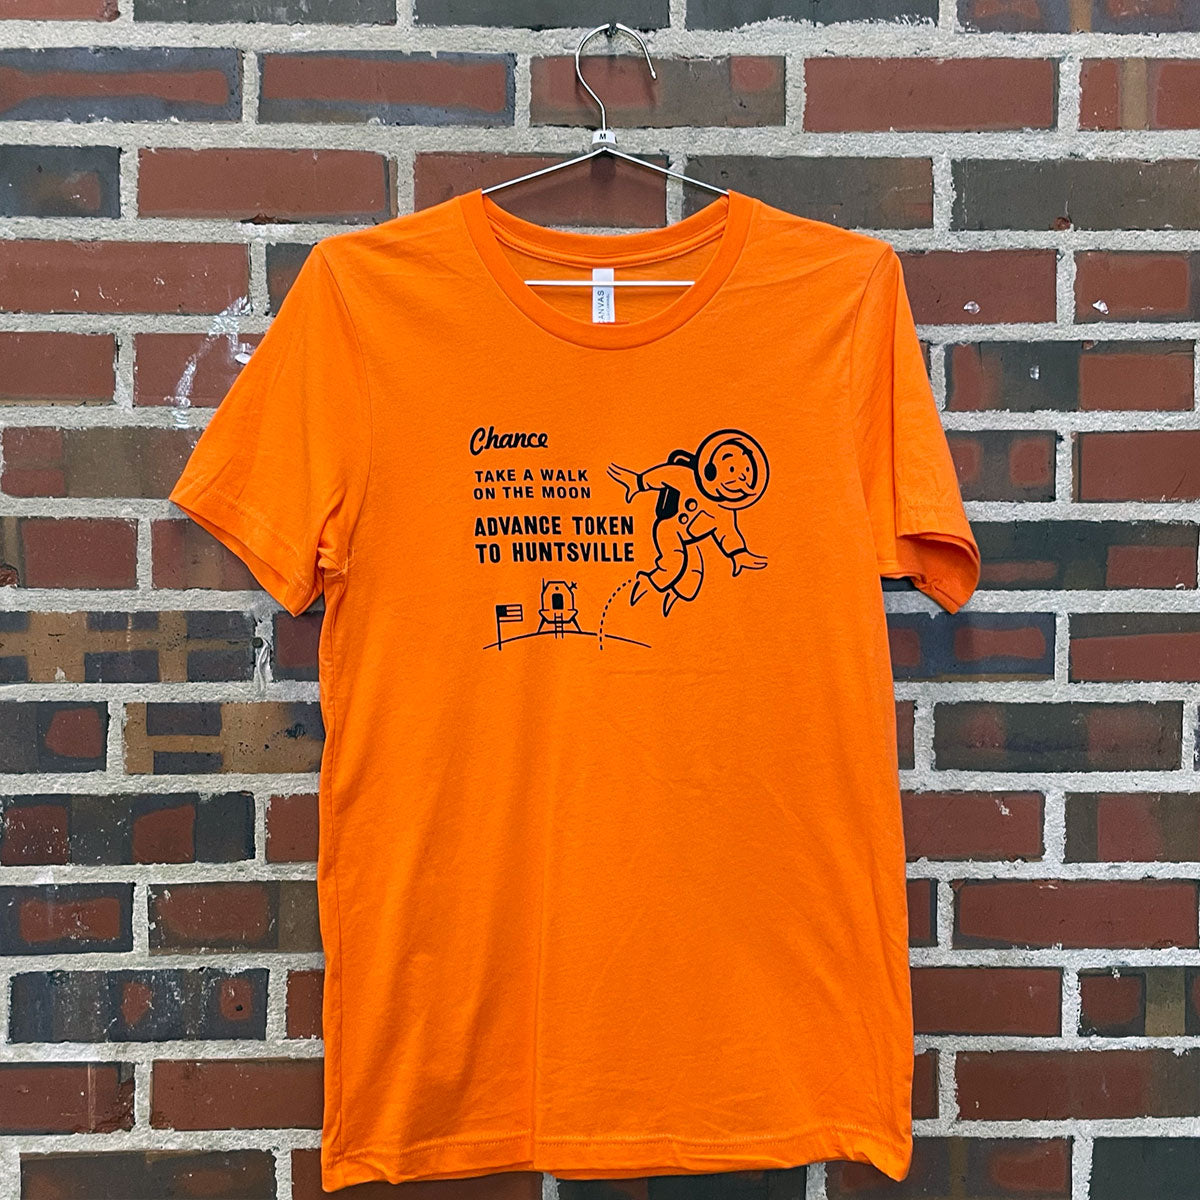 Image of Monopoly man on the moon with text " Chance; Take a walk on the moon; Advance token to Huntsville" on orange t-shirt hanging against brick wall at Lowe Mill